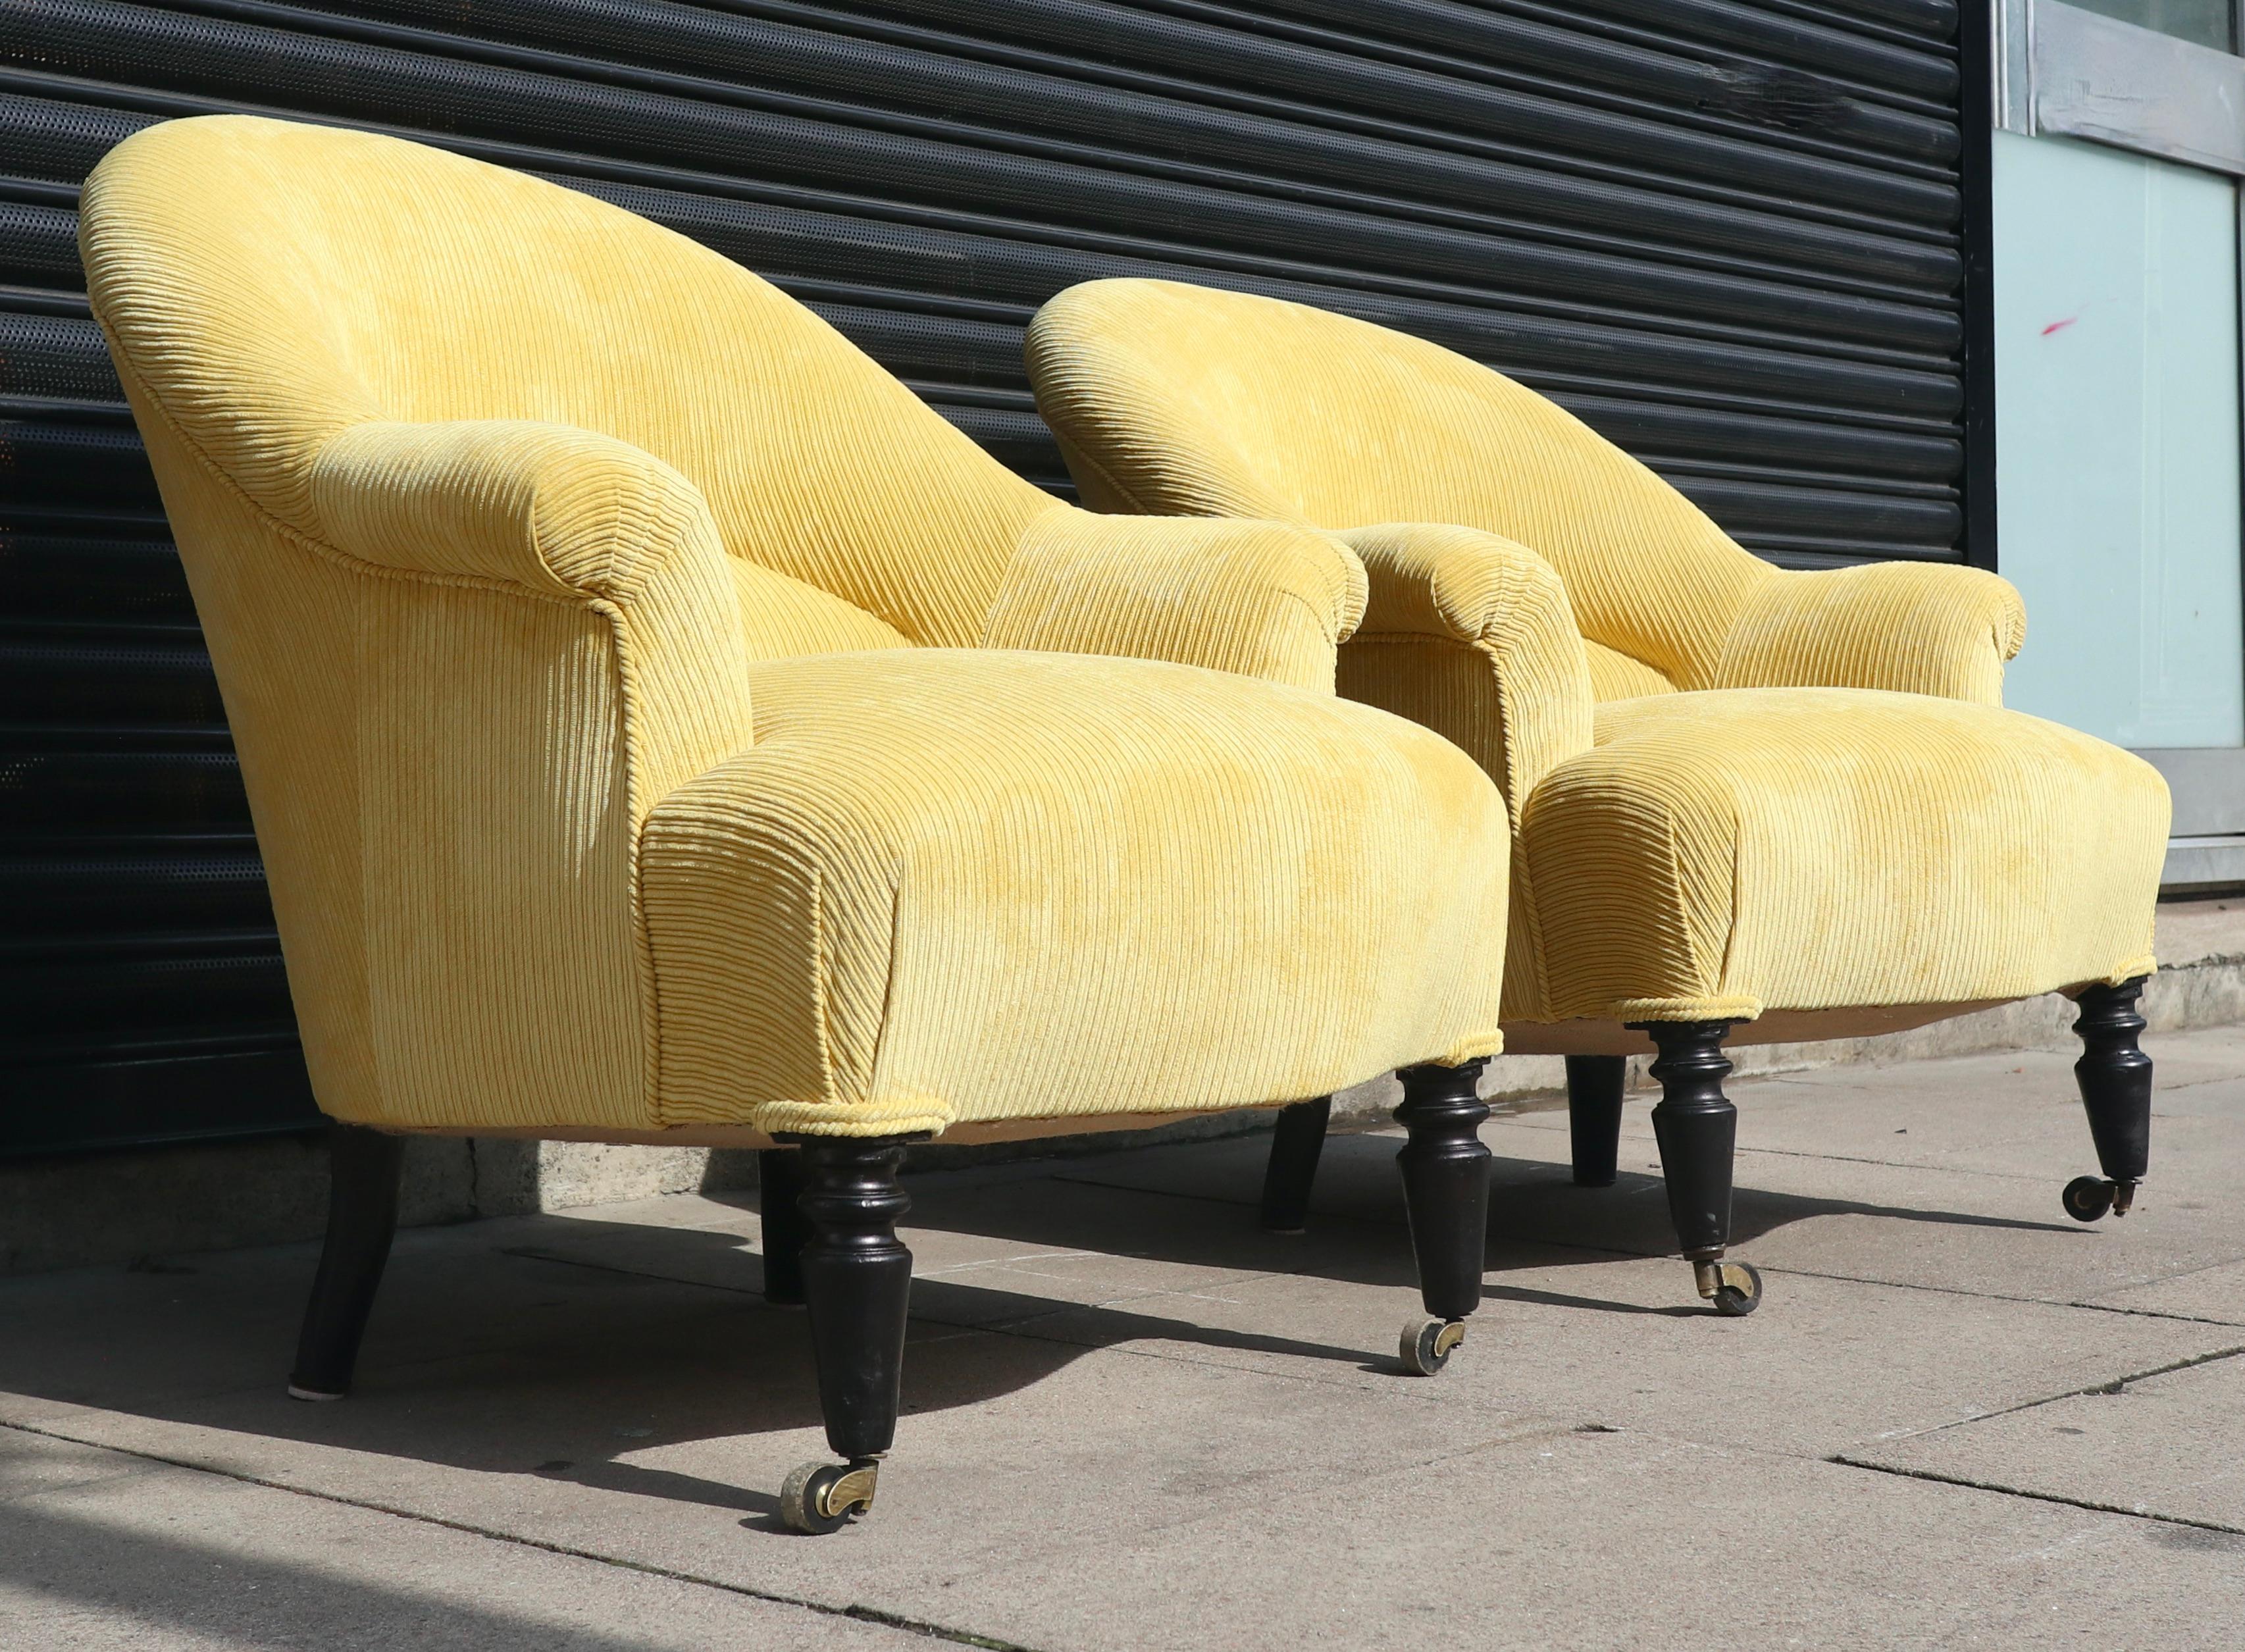  Pair of French 19th century Napoleon III crapaud armchairs in corduroy textile  For Sale 7